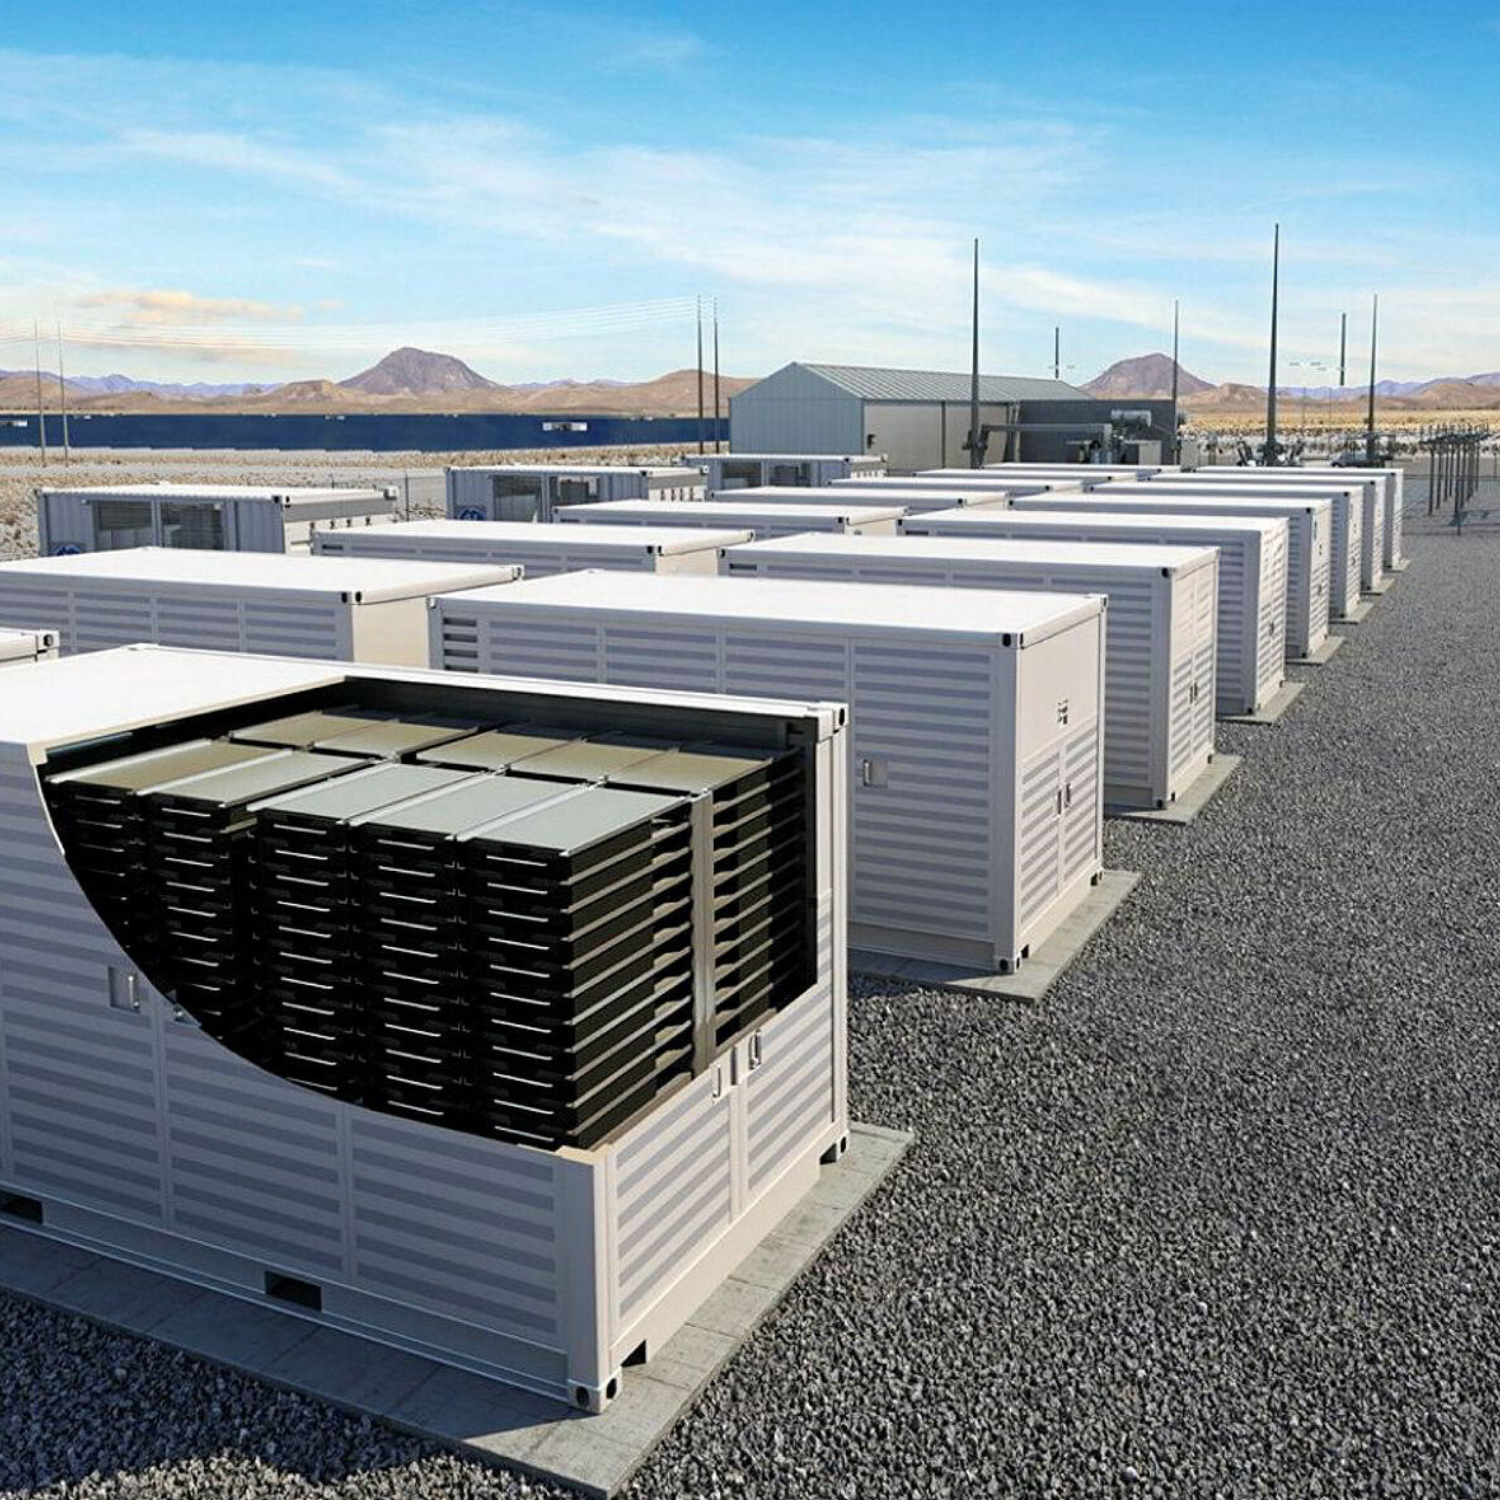 Energy storage system connected to a large power grid, designed for high-capacity electricity storage and distribution.